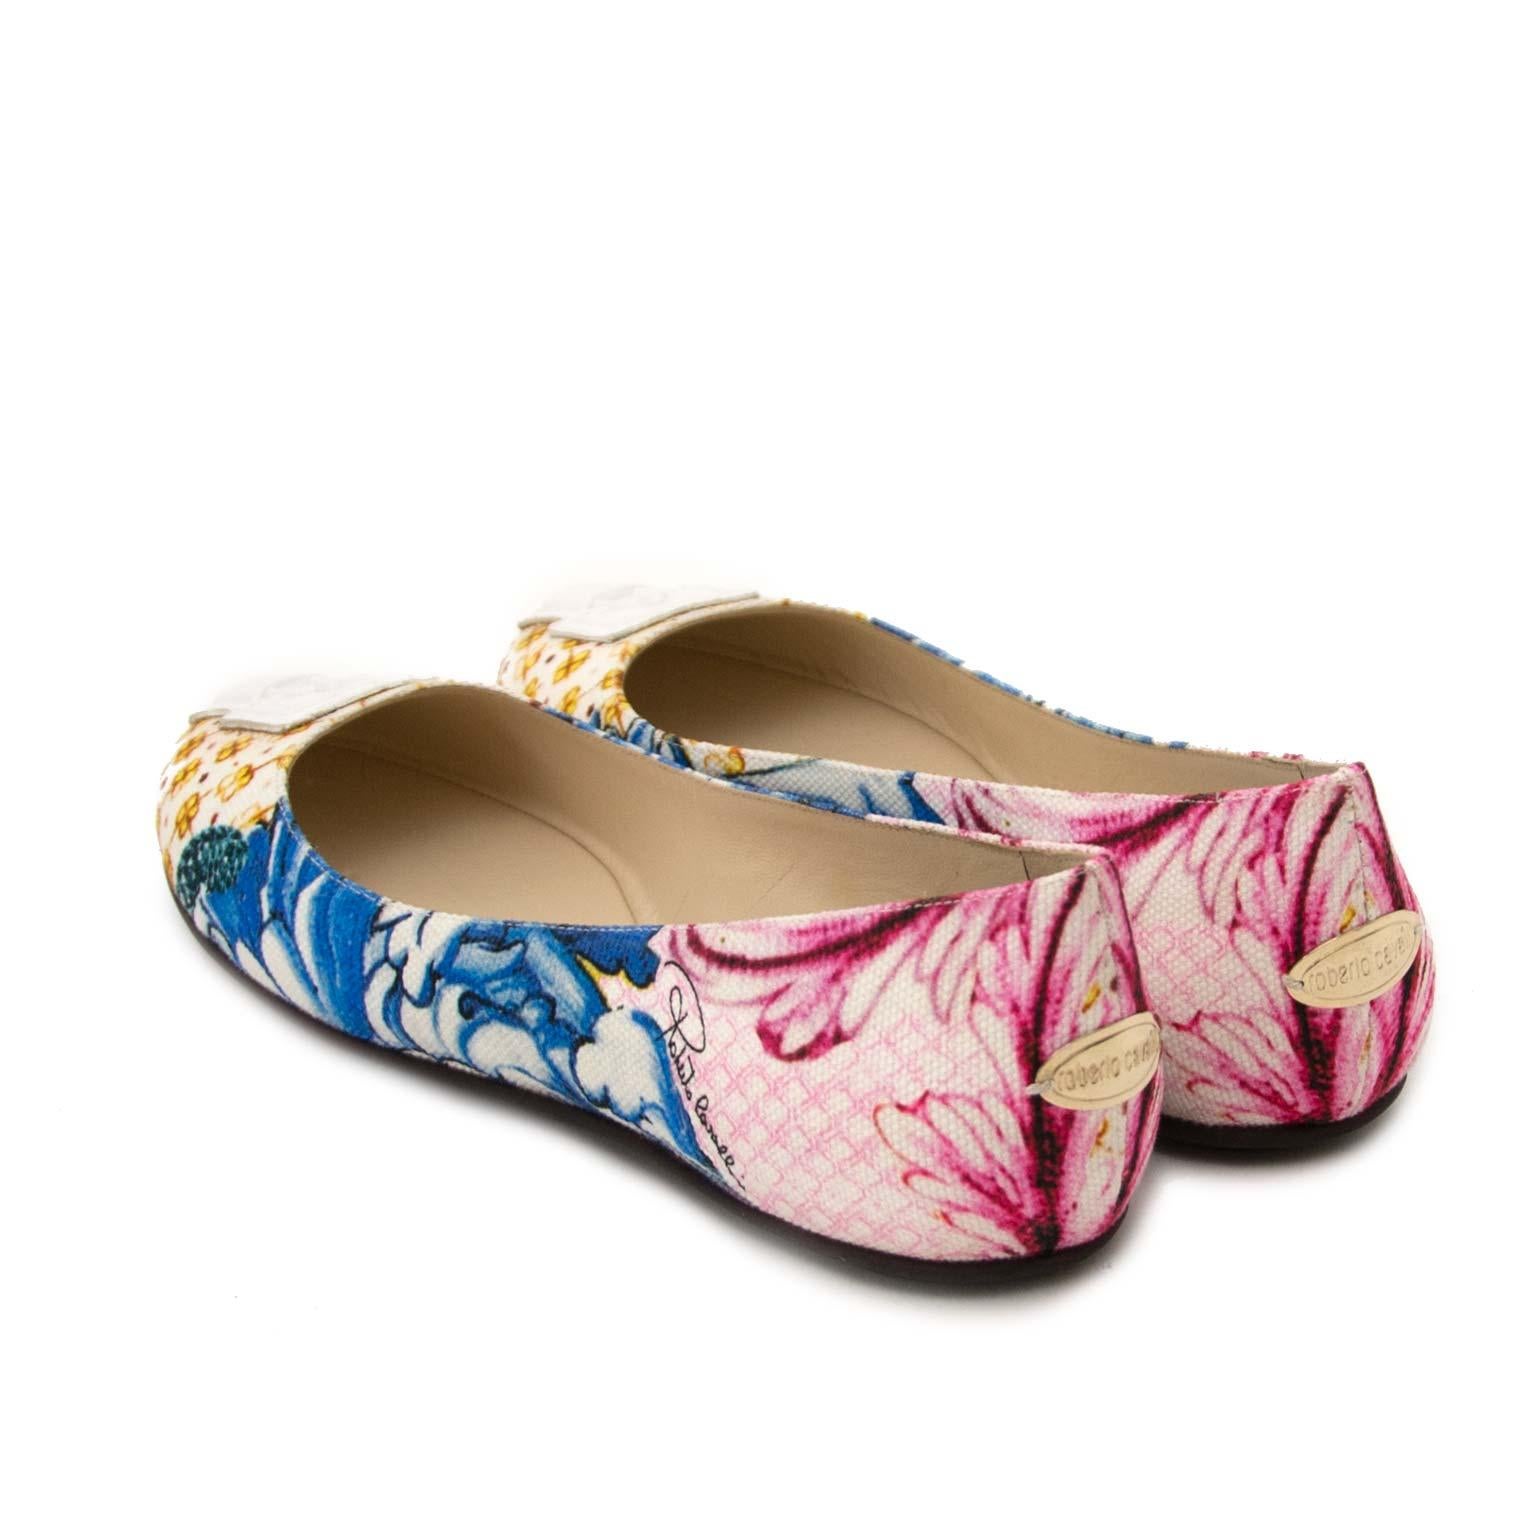 Never Worn!

Roberto Cavalli Multicolor Flats - size 37

Roberto Cavalli is known for creating bold, colorful and stylish pieces that convey the atmosphere of the wild nature. Every piece is unique, yet wearable and fit for every occasion. 

These